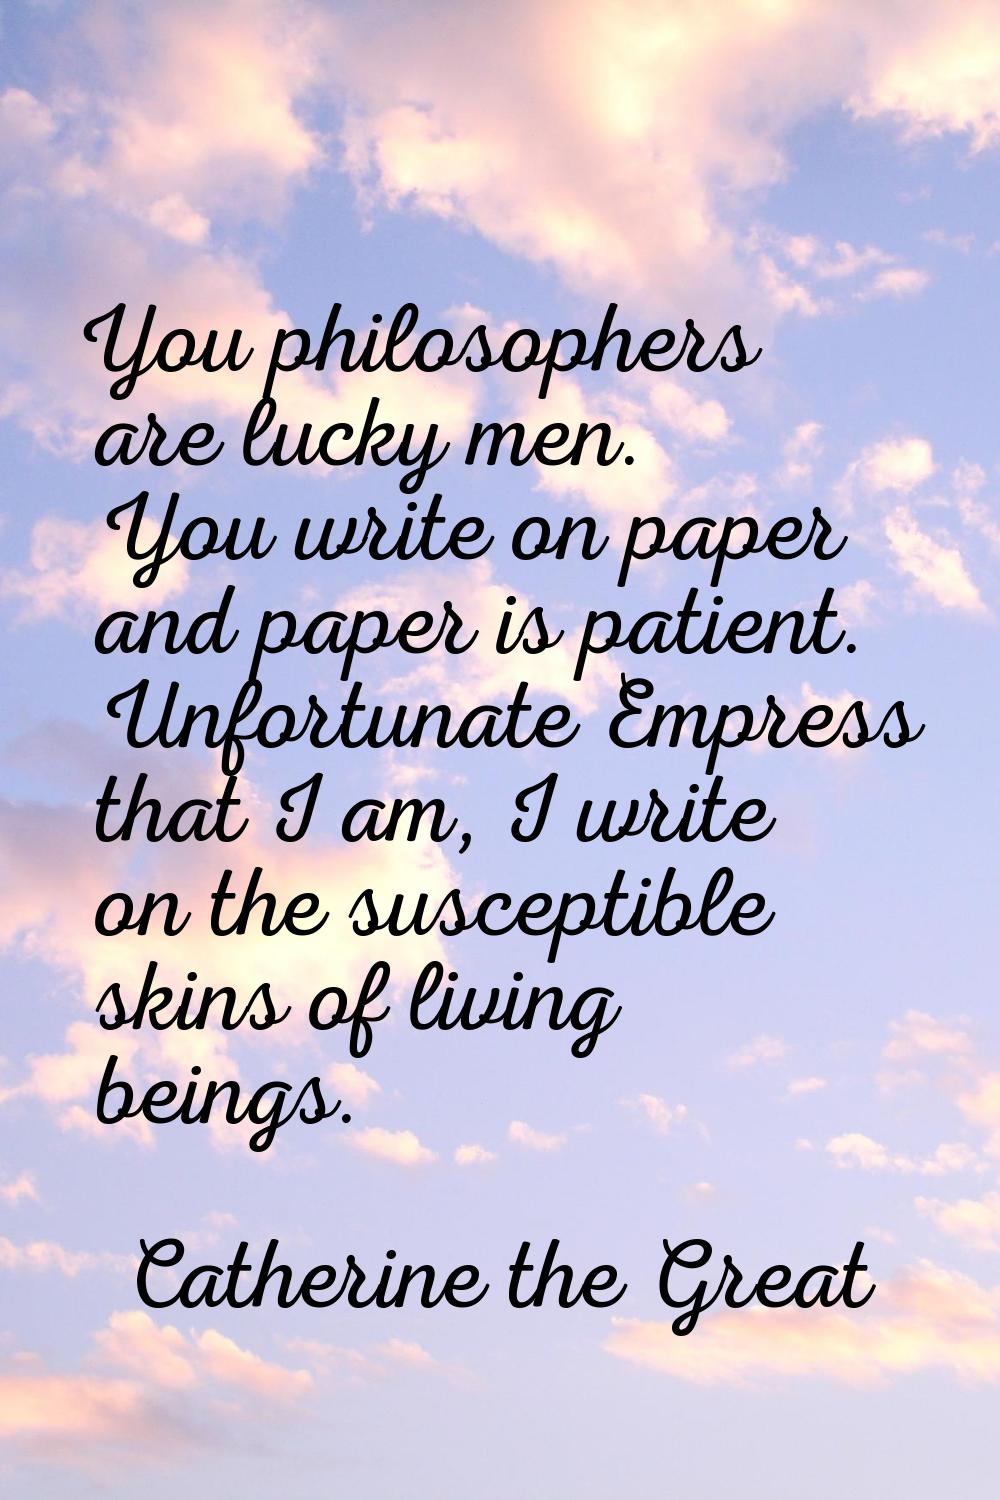 You philosophers are lucky men. You write on paper and paper is patient. Unfortunate Empress that I